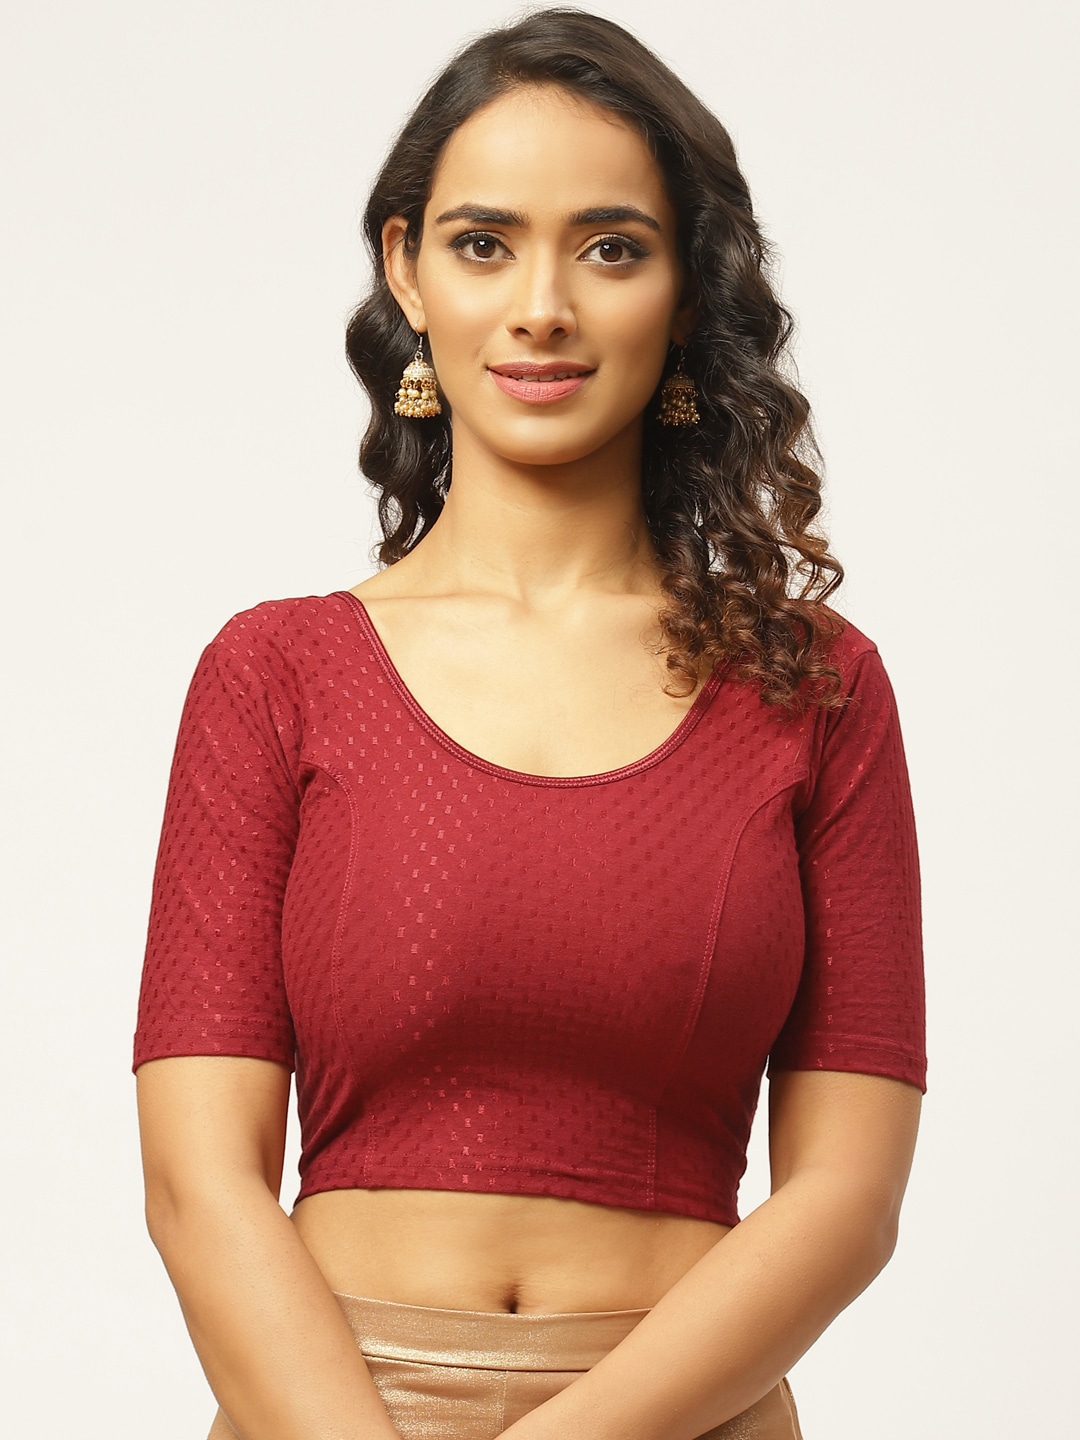 VASTRANAND Women Maroon Woven Design Stretchable Saree Blouse Price in India